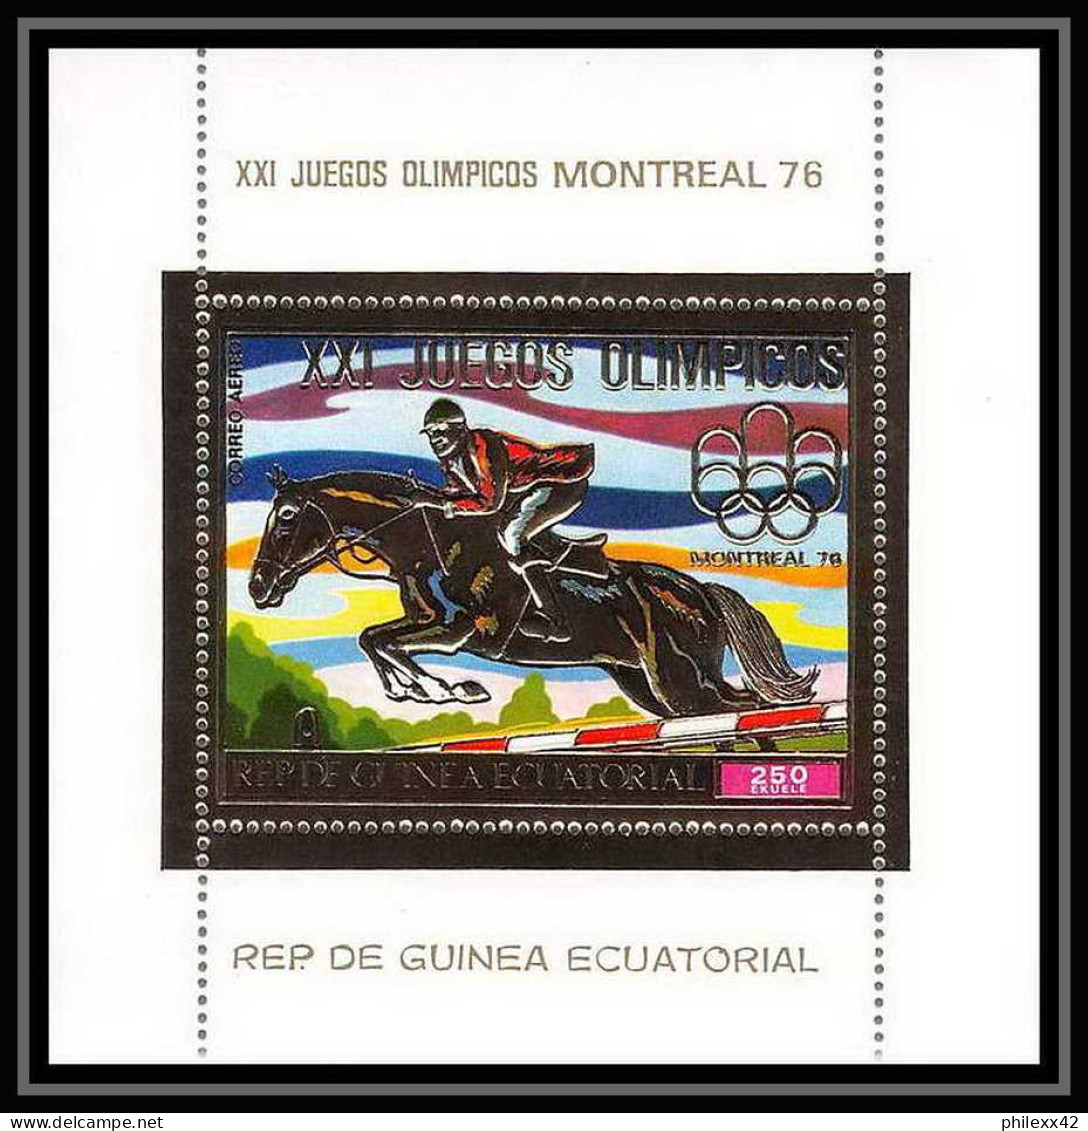 198 Guinée équatoriale Guinea Bloc N°225 OR Gold Stamps Jeux Olympiques Olympic Games 1976 Montreal Jumping Cheval - Springreiten